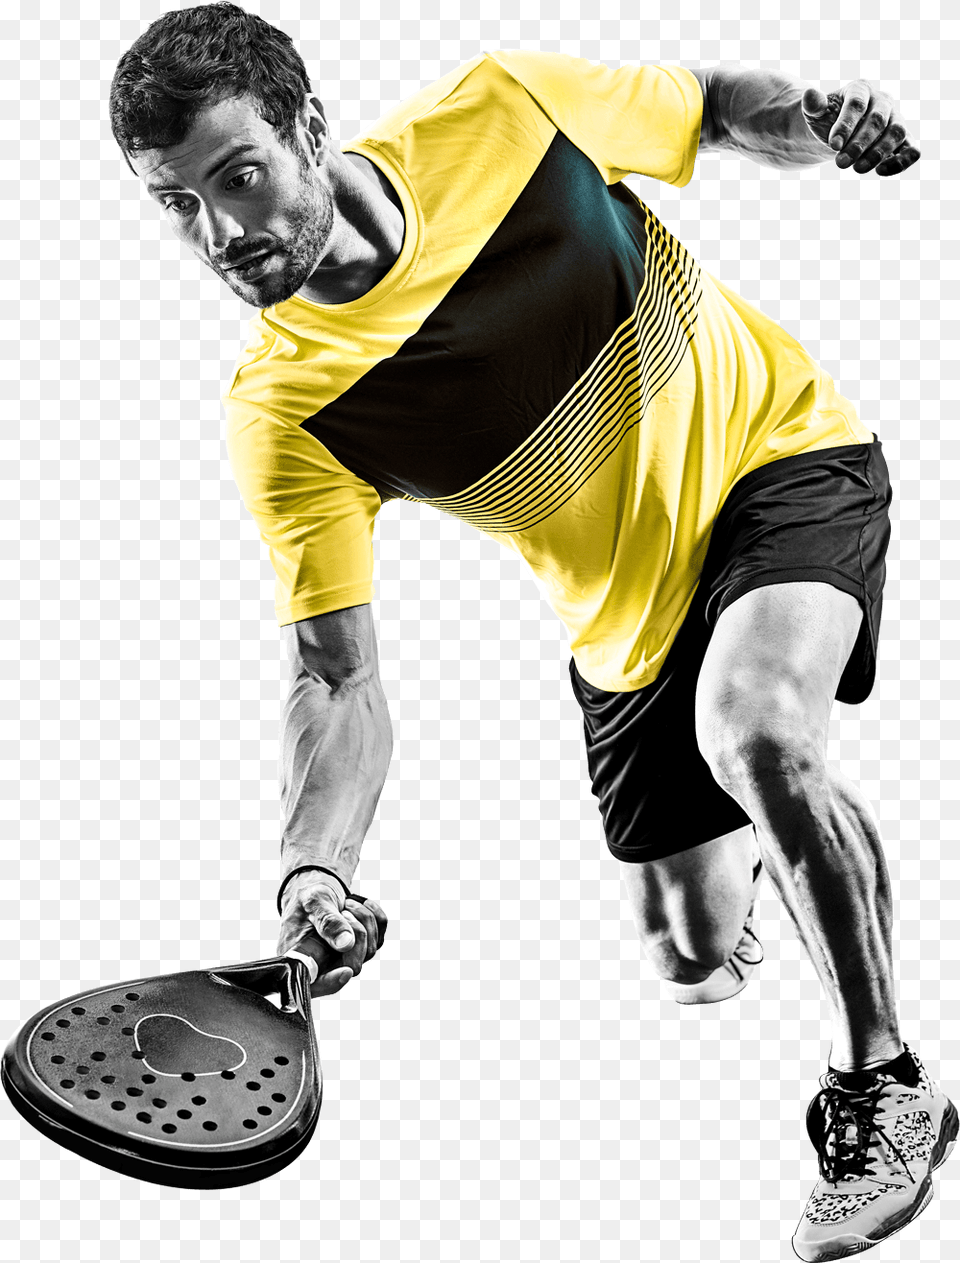 Player, Sneaker, Shorts, Clothing, Shoe Png